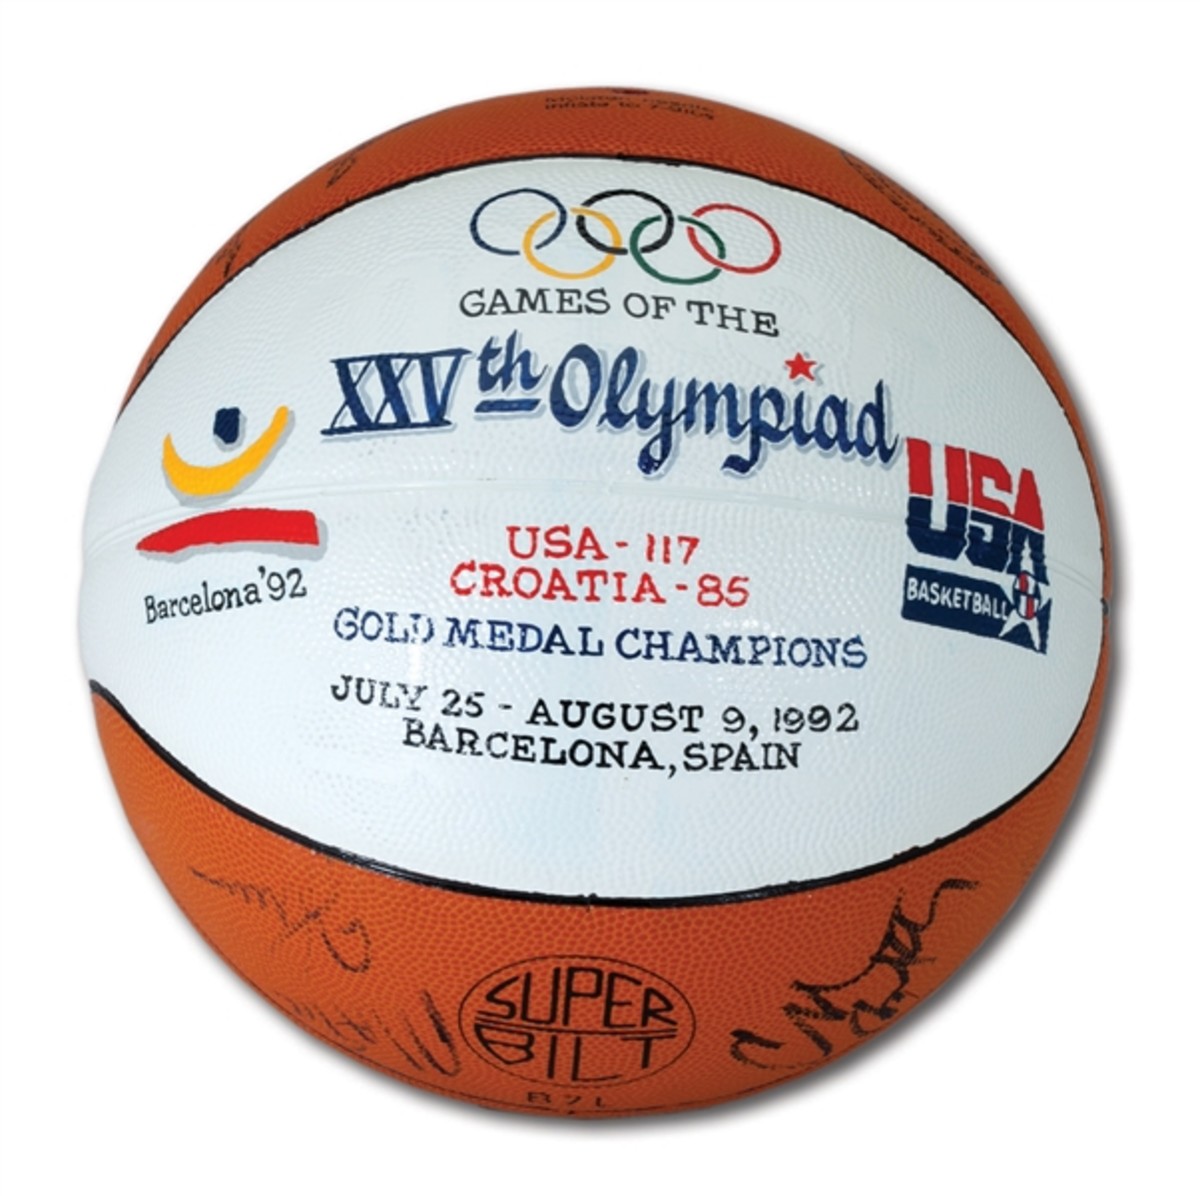 Game-used ball from the Dream Team’s gold medal–winning win over Croatia in 1992. The ball was autographed by head coach Chuck Daley and 11 of the 12 players (only David Robinson’s signature is missing).